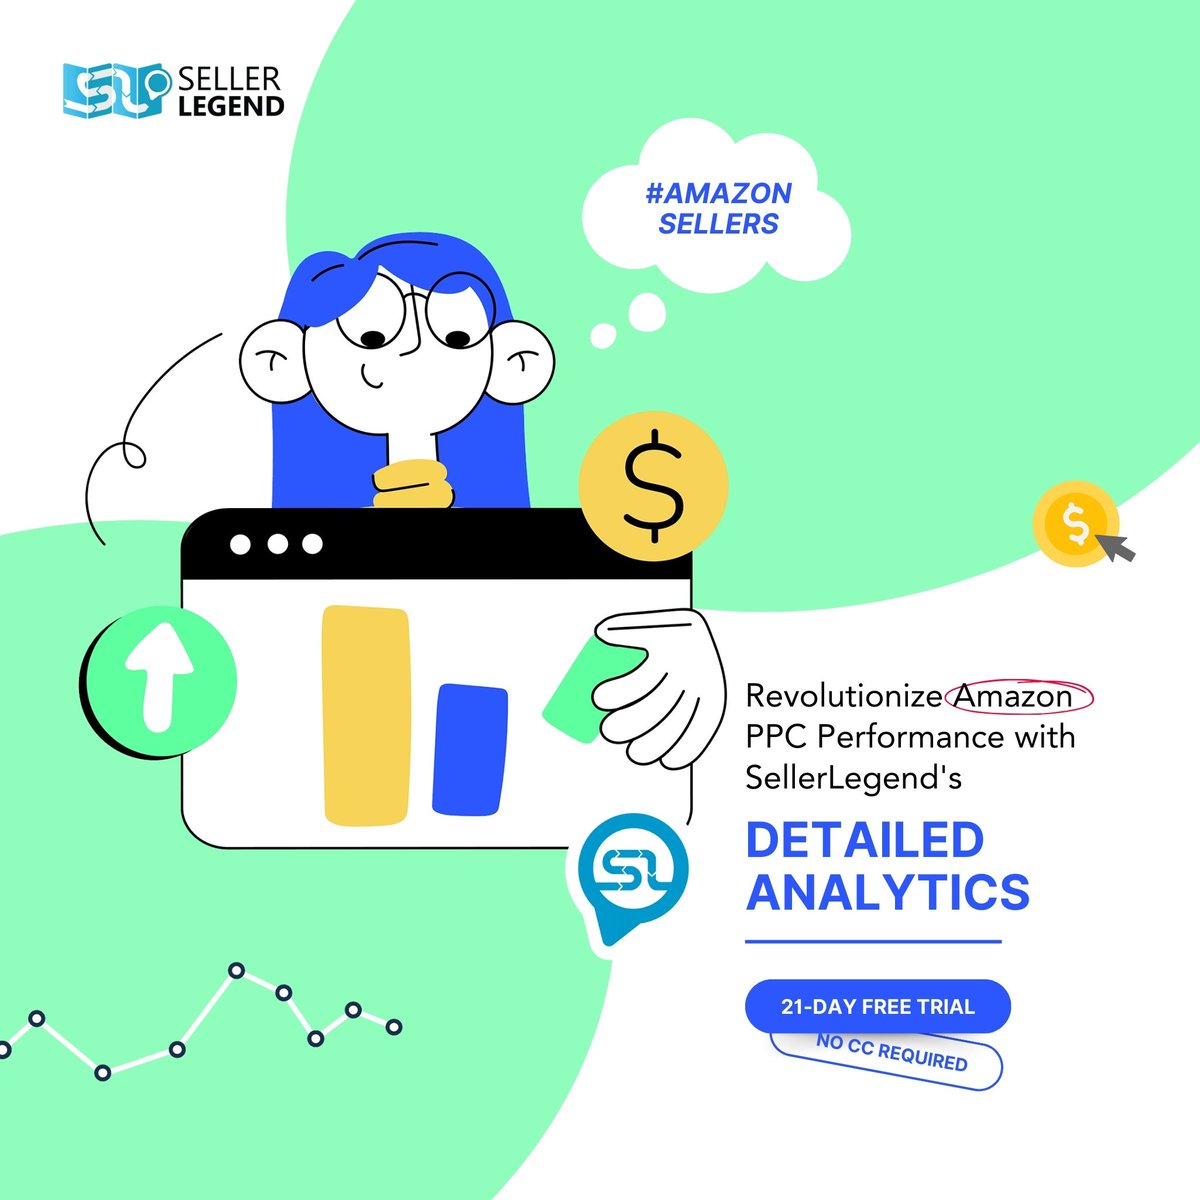 #AmazonSellers - Boost your Amazon PPC performance with #SellerLegend! Unlock powerful #analytics to refine your ad strategies and surge ahead of the competition. Ready to transform your PPC results? Explore how our tools can make a difference! #PPCExcellence #AdStrategy